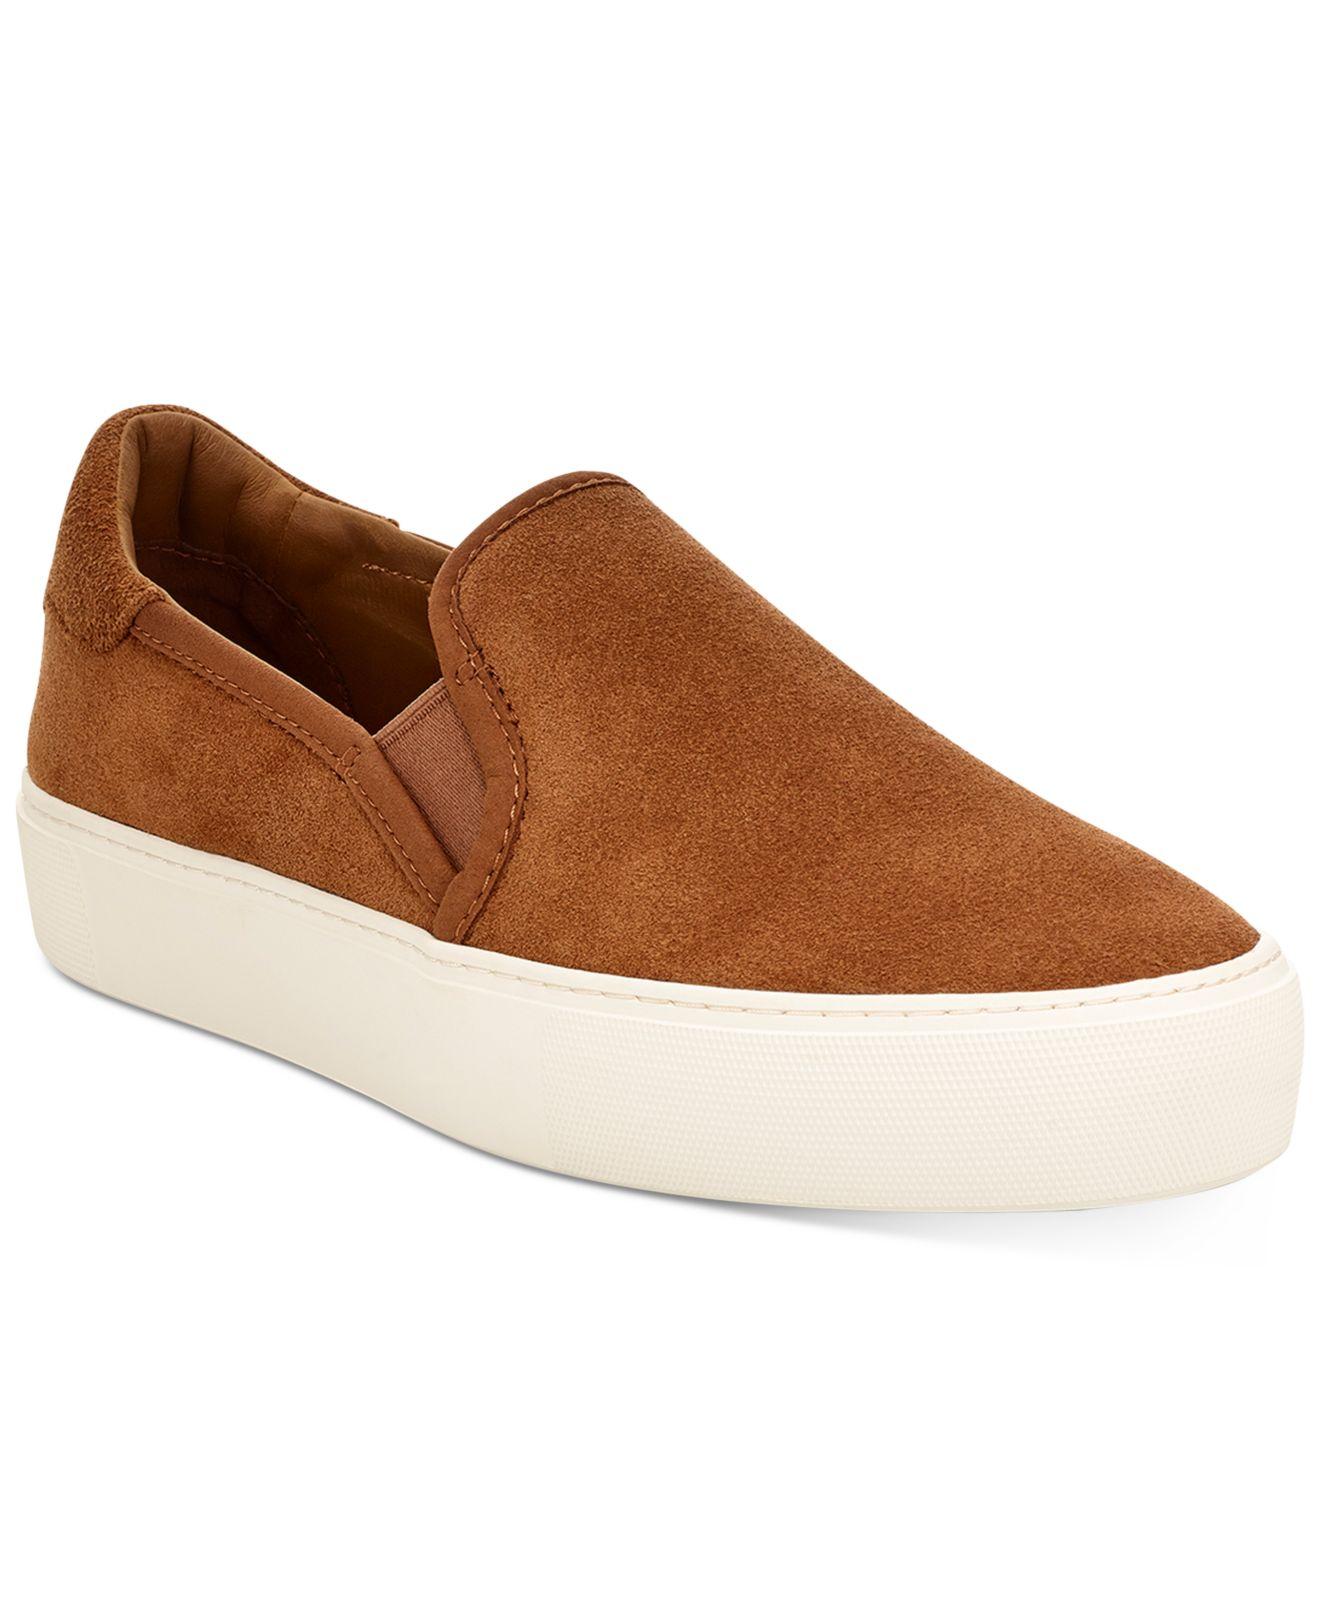 UGG Leather Jass Slip-on Sneakers in Chestnut (Brown) - Lyst